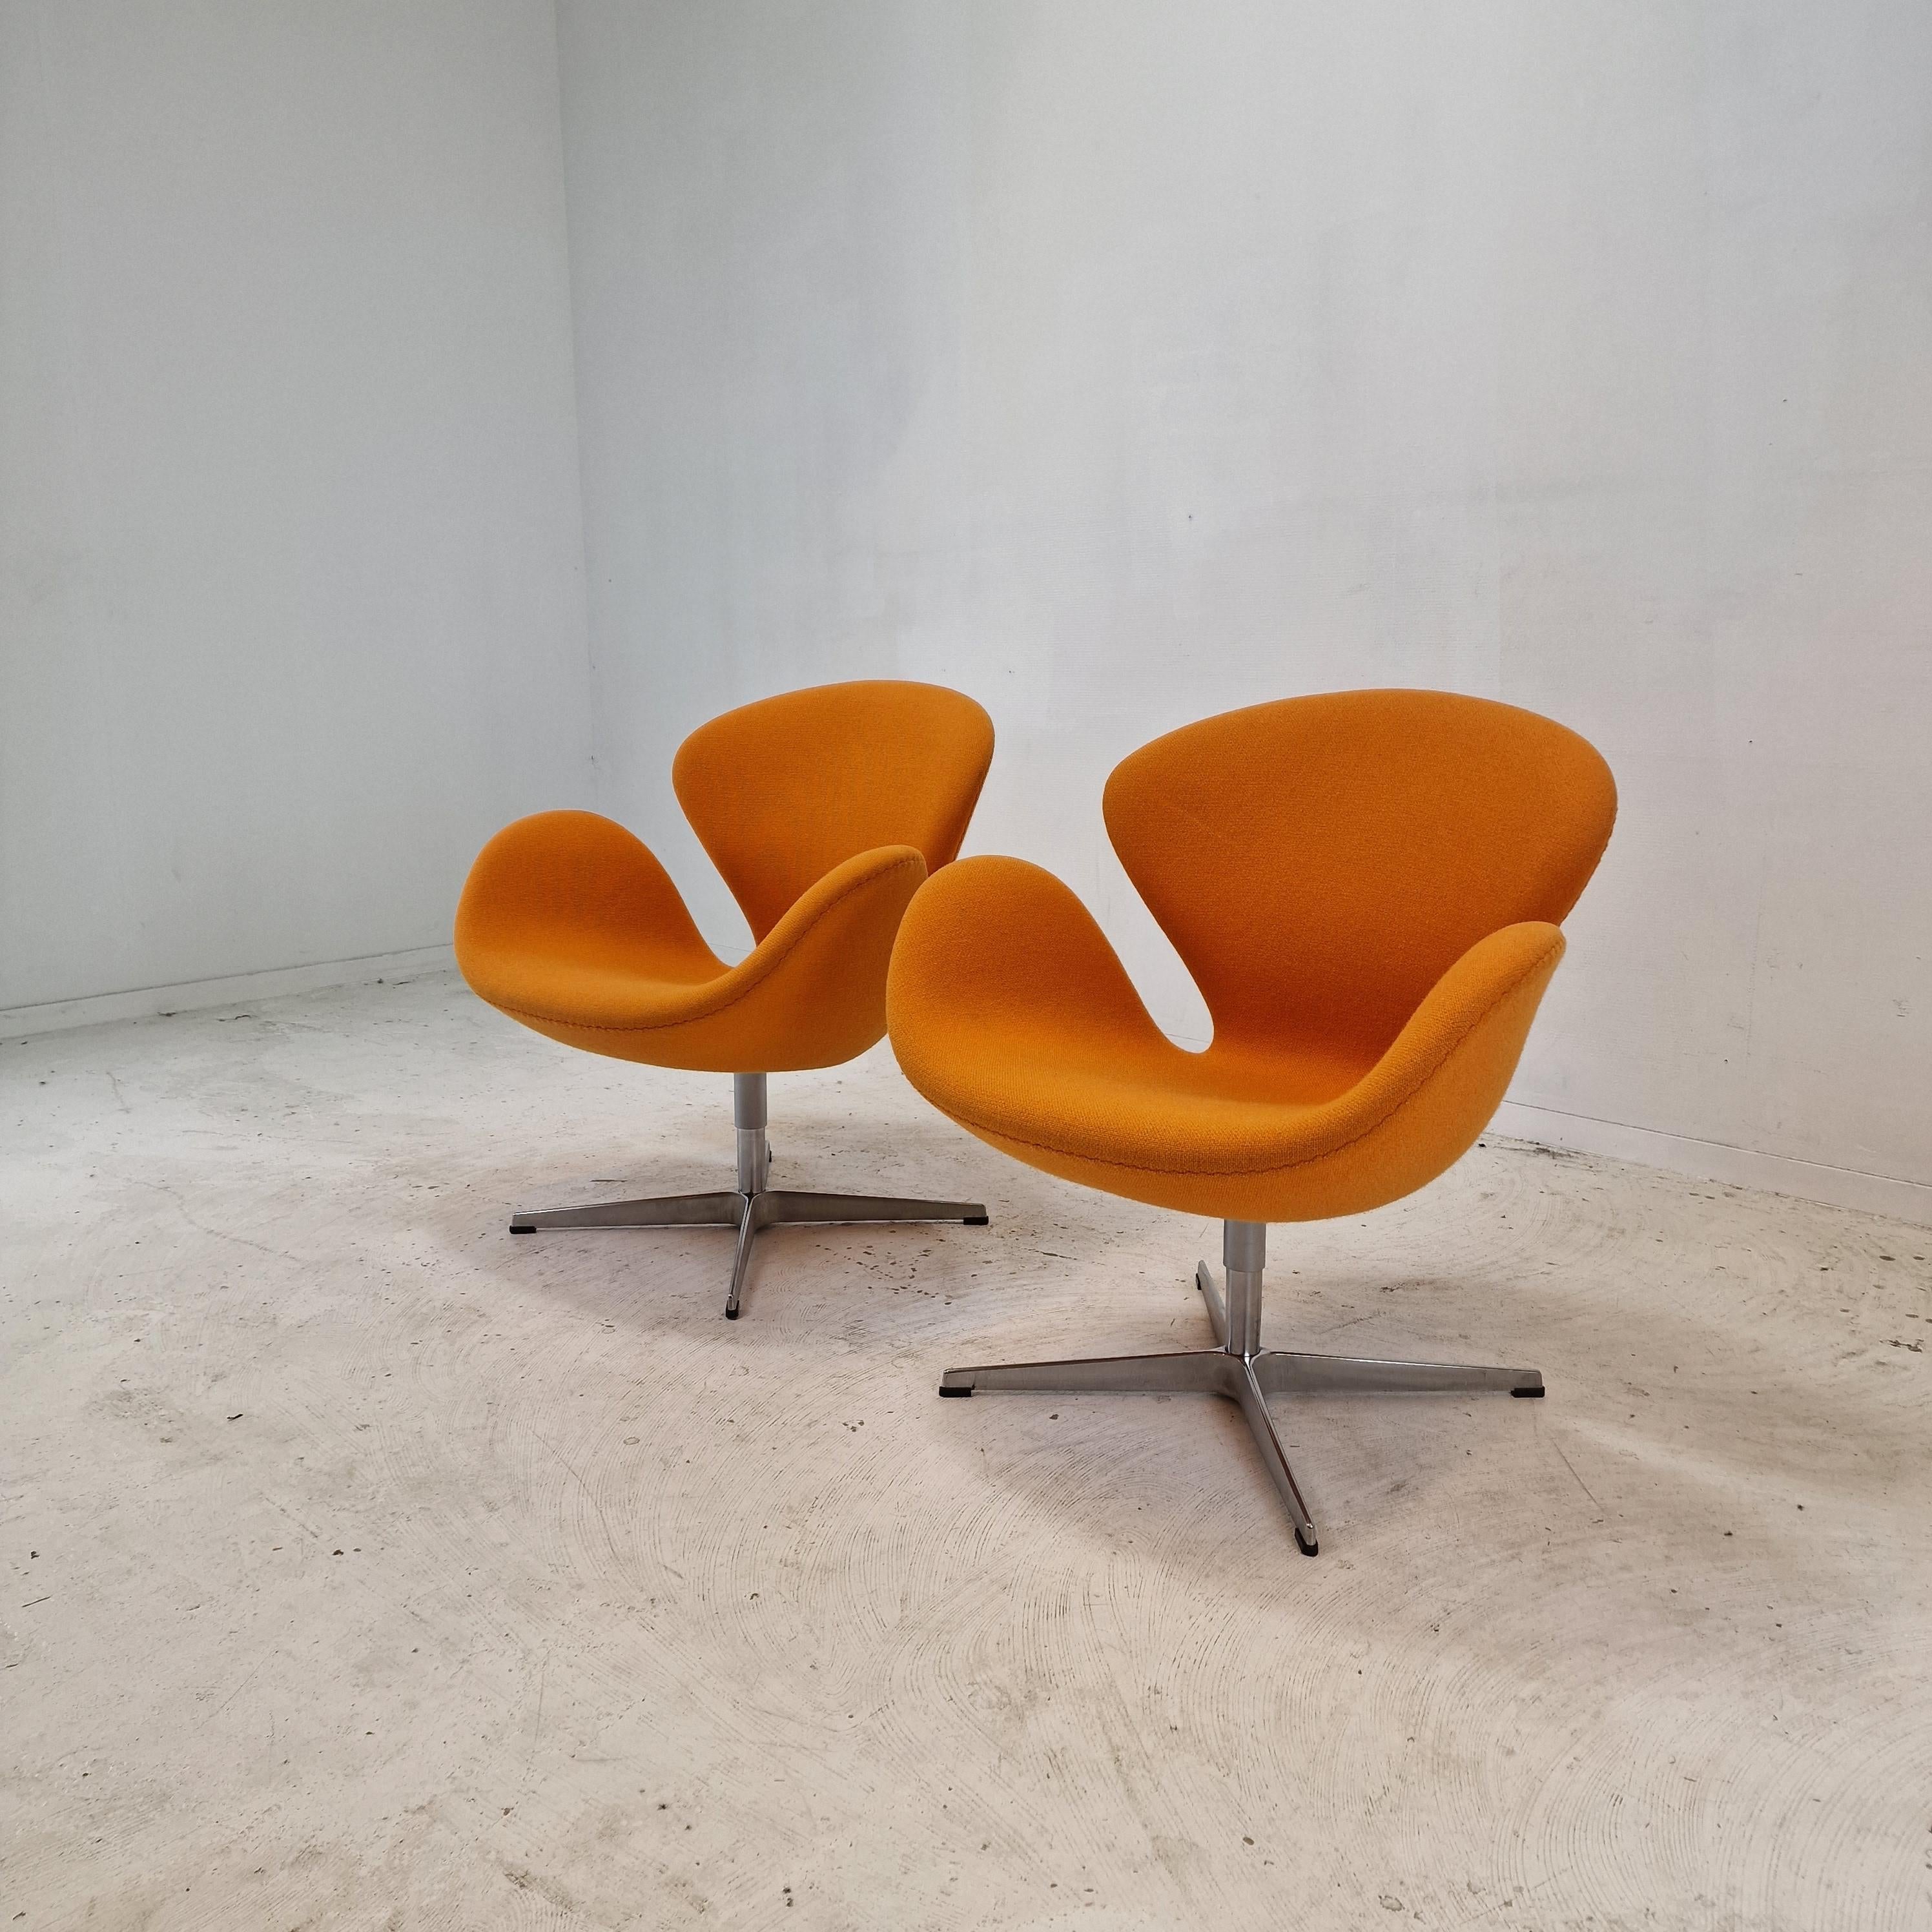 Beautiful set of two original Swan Chairs. 

These Swan chairs were designed in the 1950s by Arne Jacobsen for the SAS Hotel in Copenhagen and produced by Fritz Hansen.

The chairs feature a wonderful original orange upholstery, the high quality